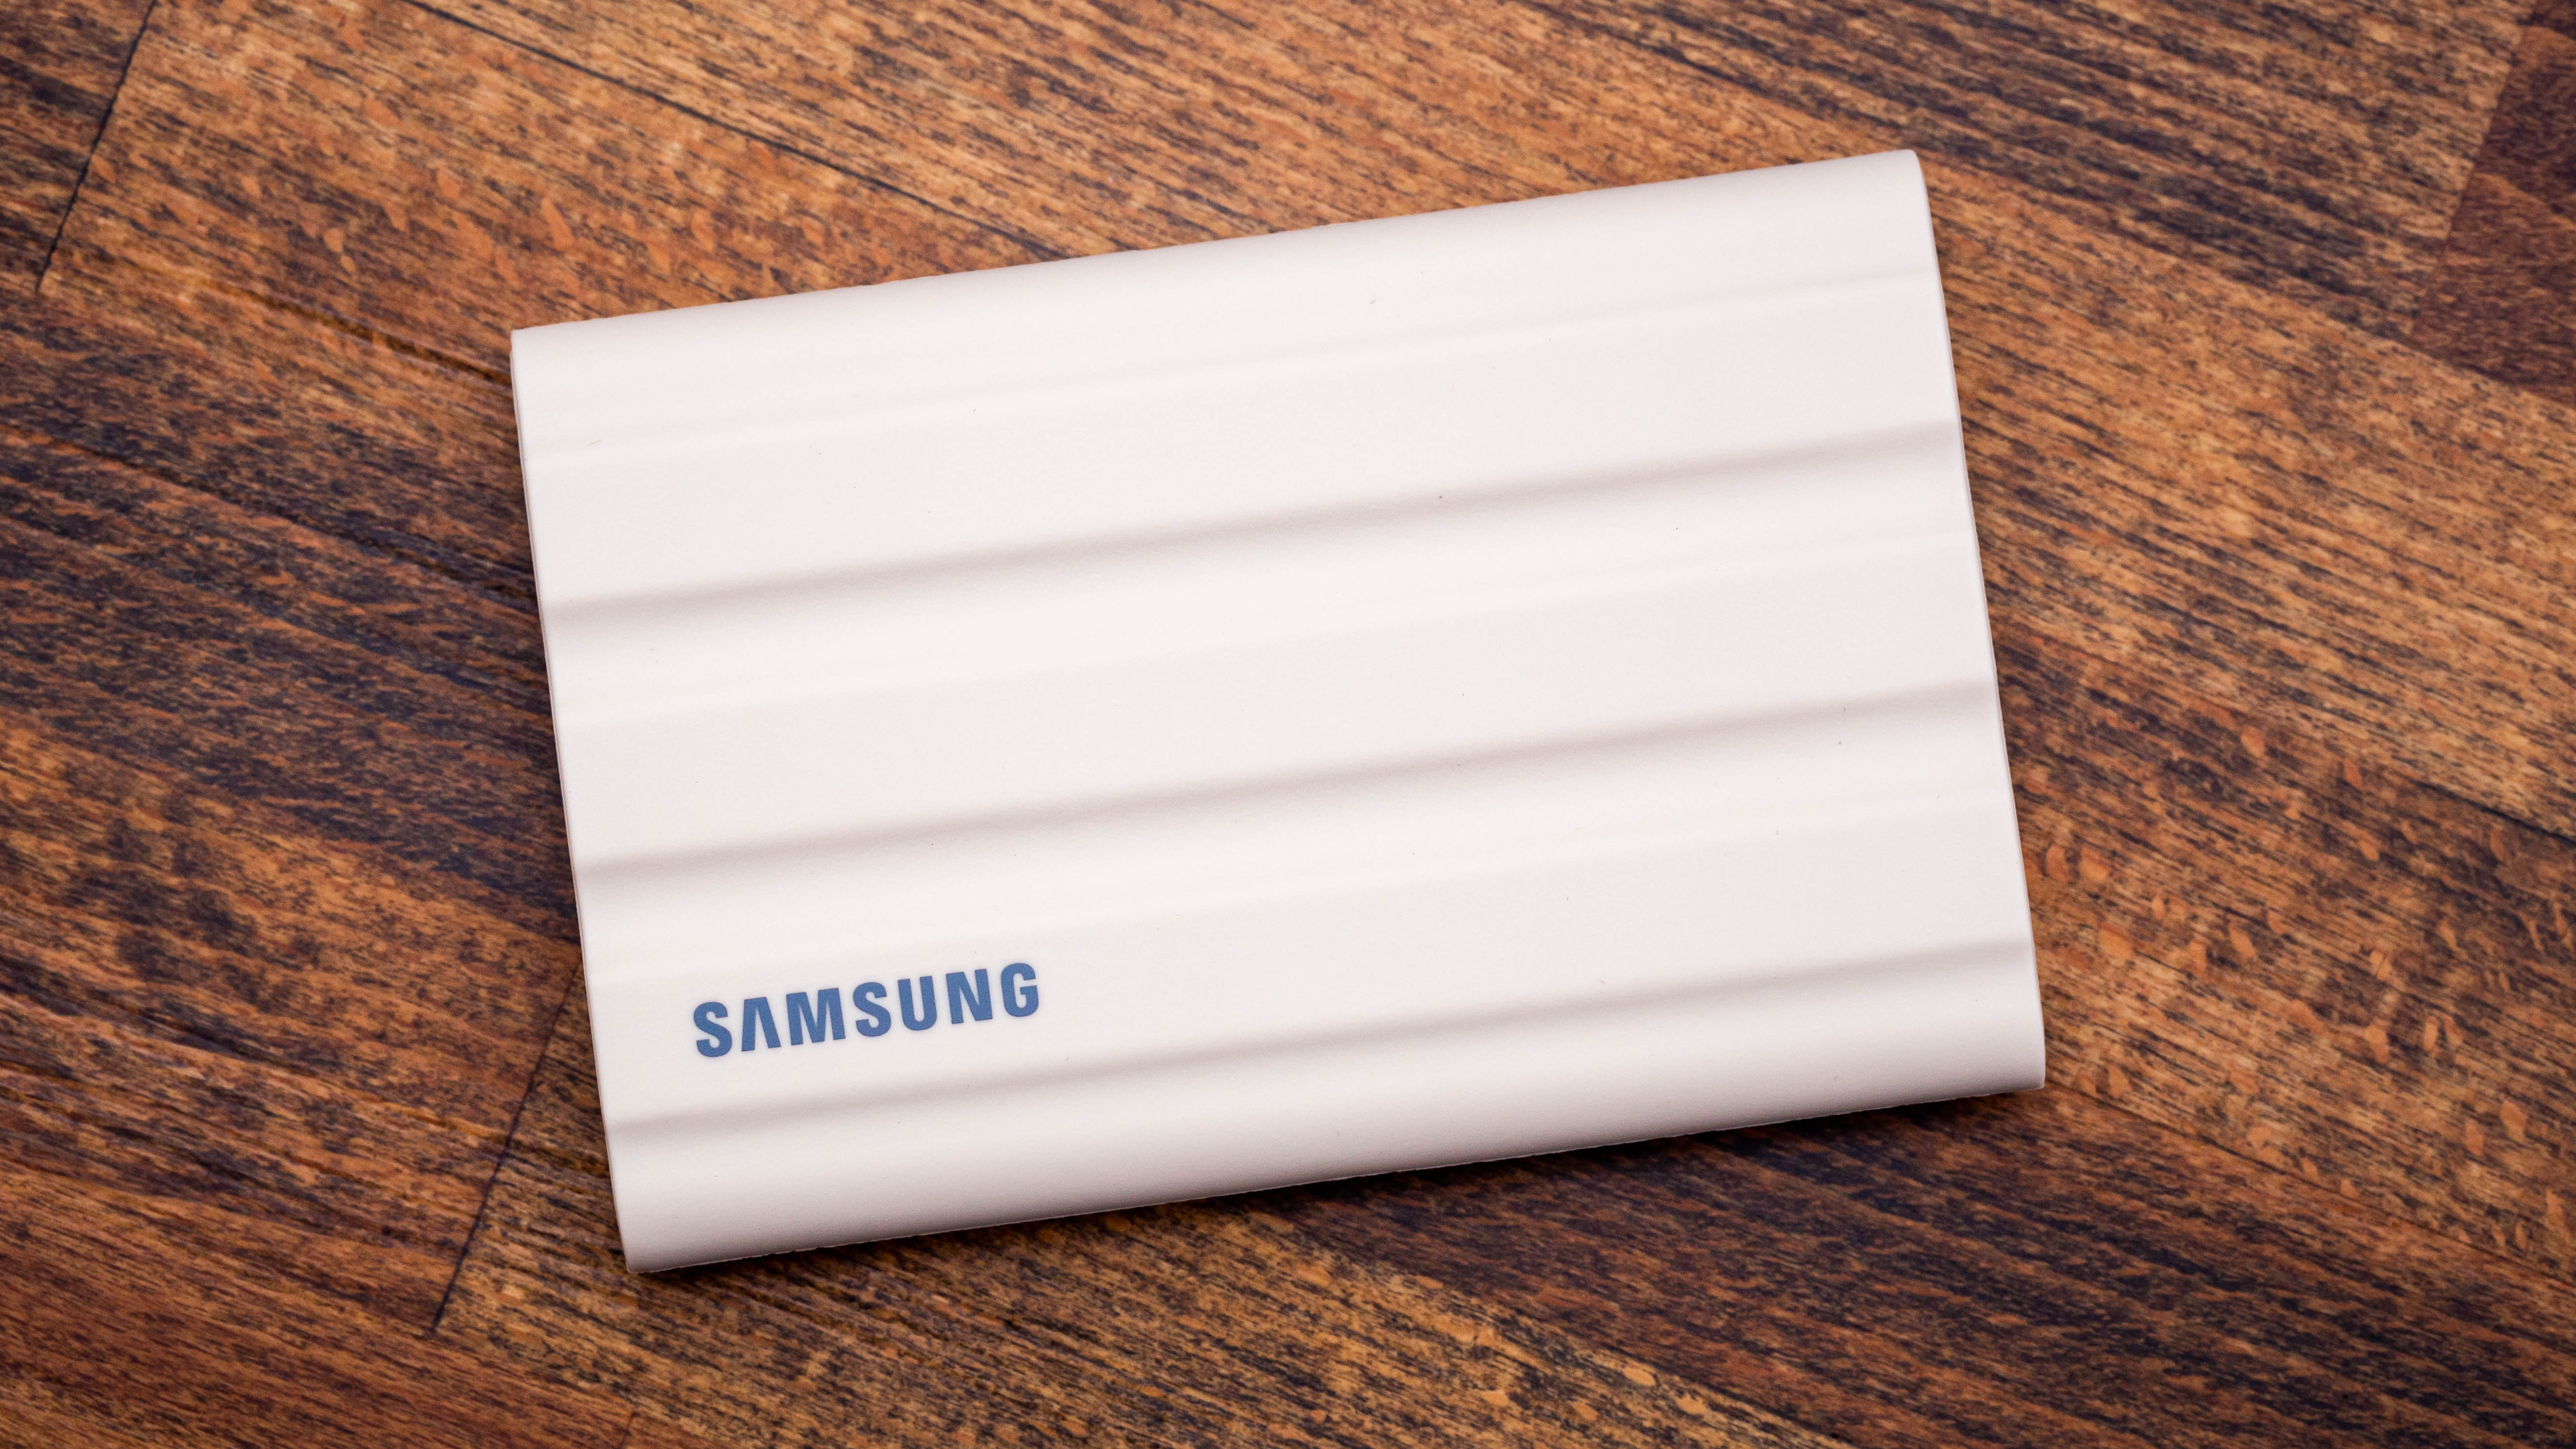 Samsung T7 Shield Portable SSD Review: Tough and Consistent